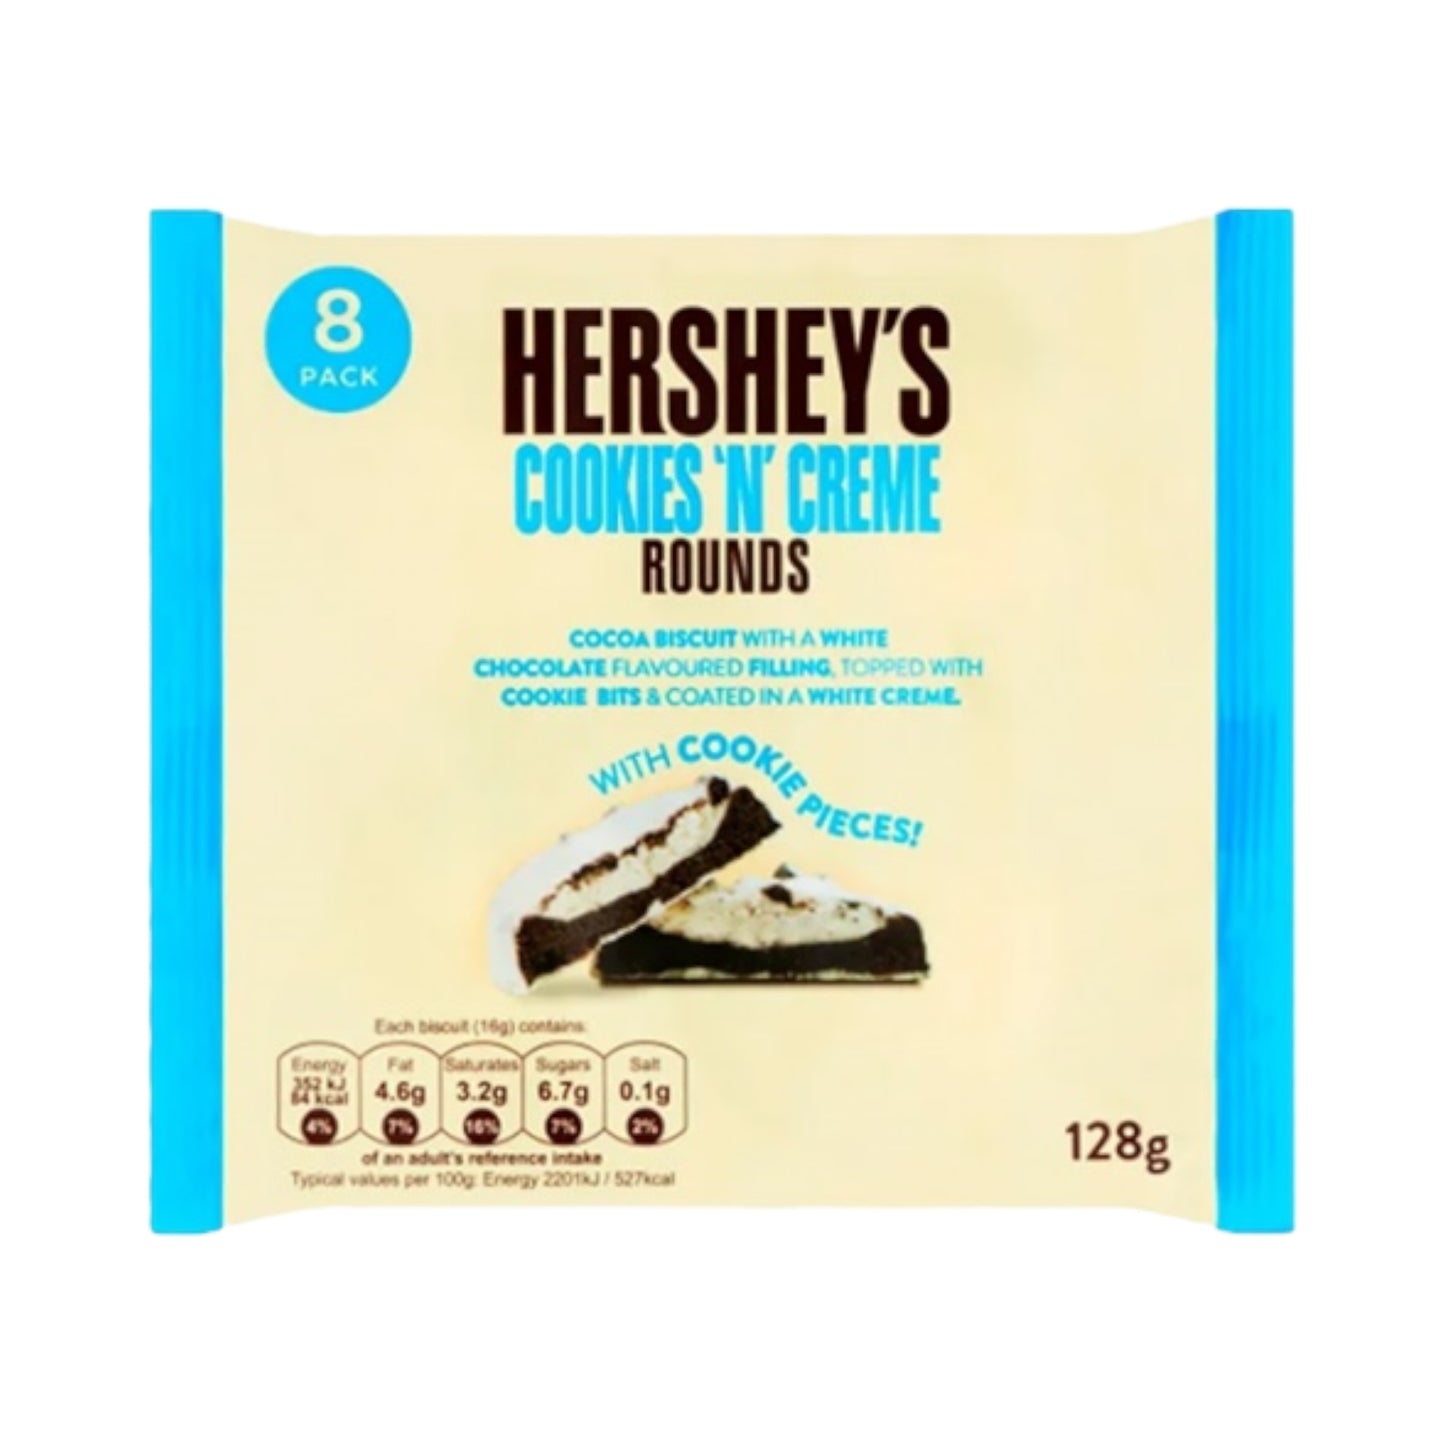 Hershey's Cookies 'N' Creme Rounds 8-Pack - 128g